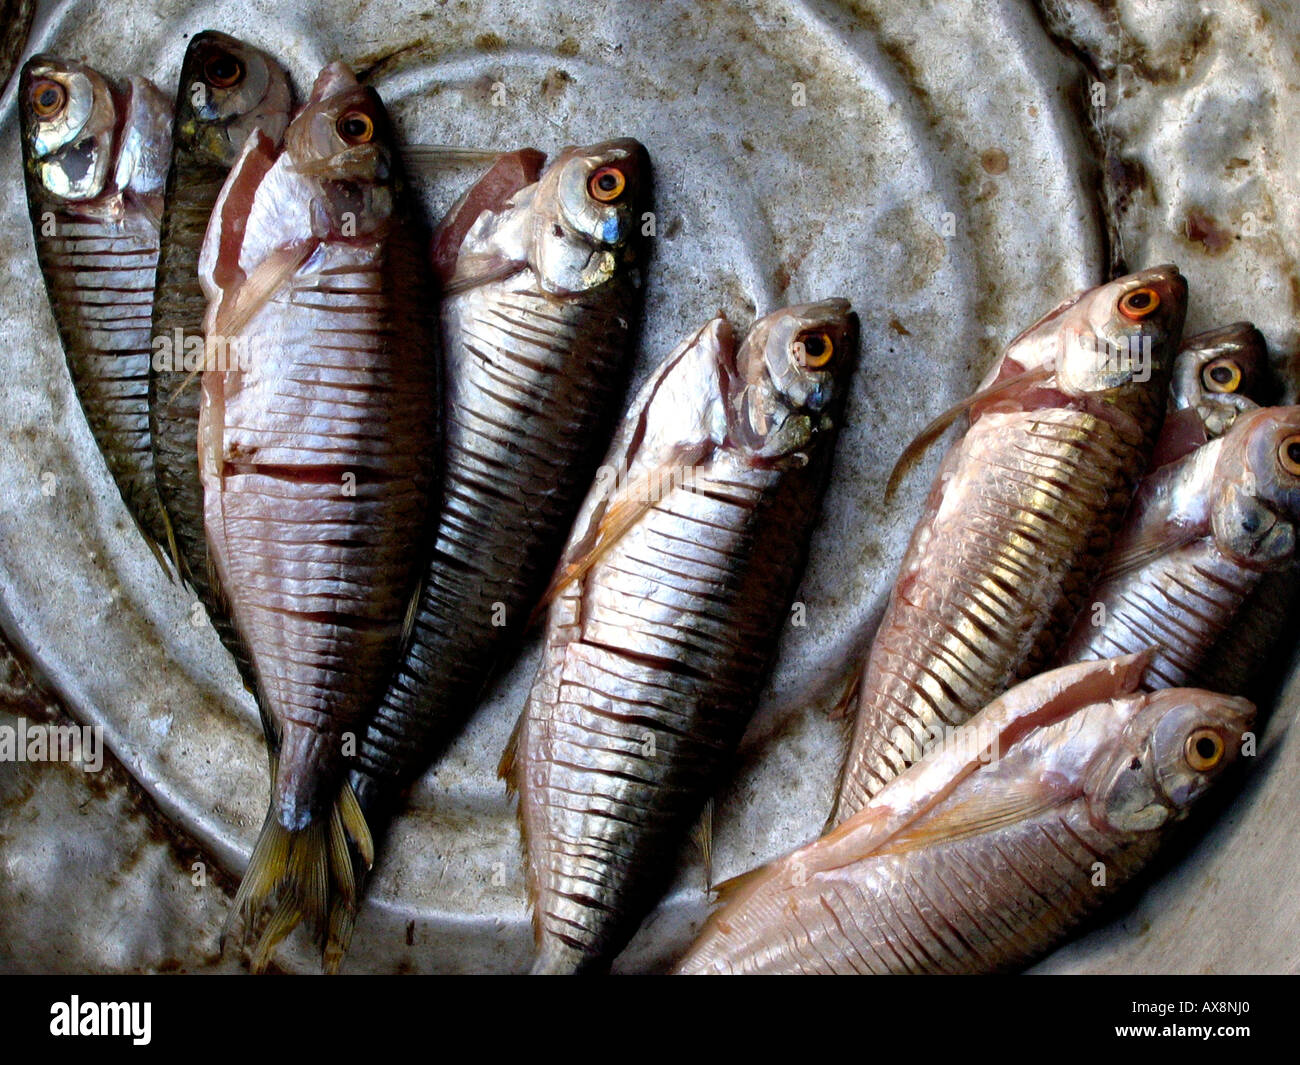 Fish, Palenque, Colombia, South America Stock Photo